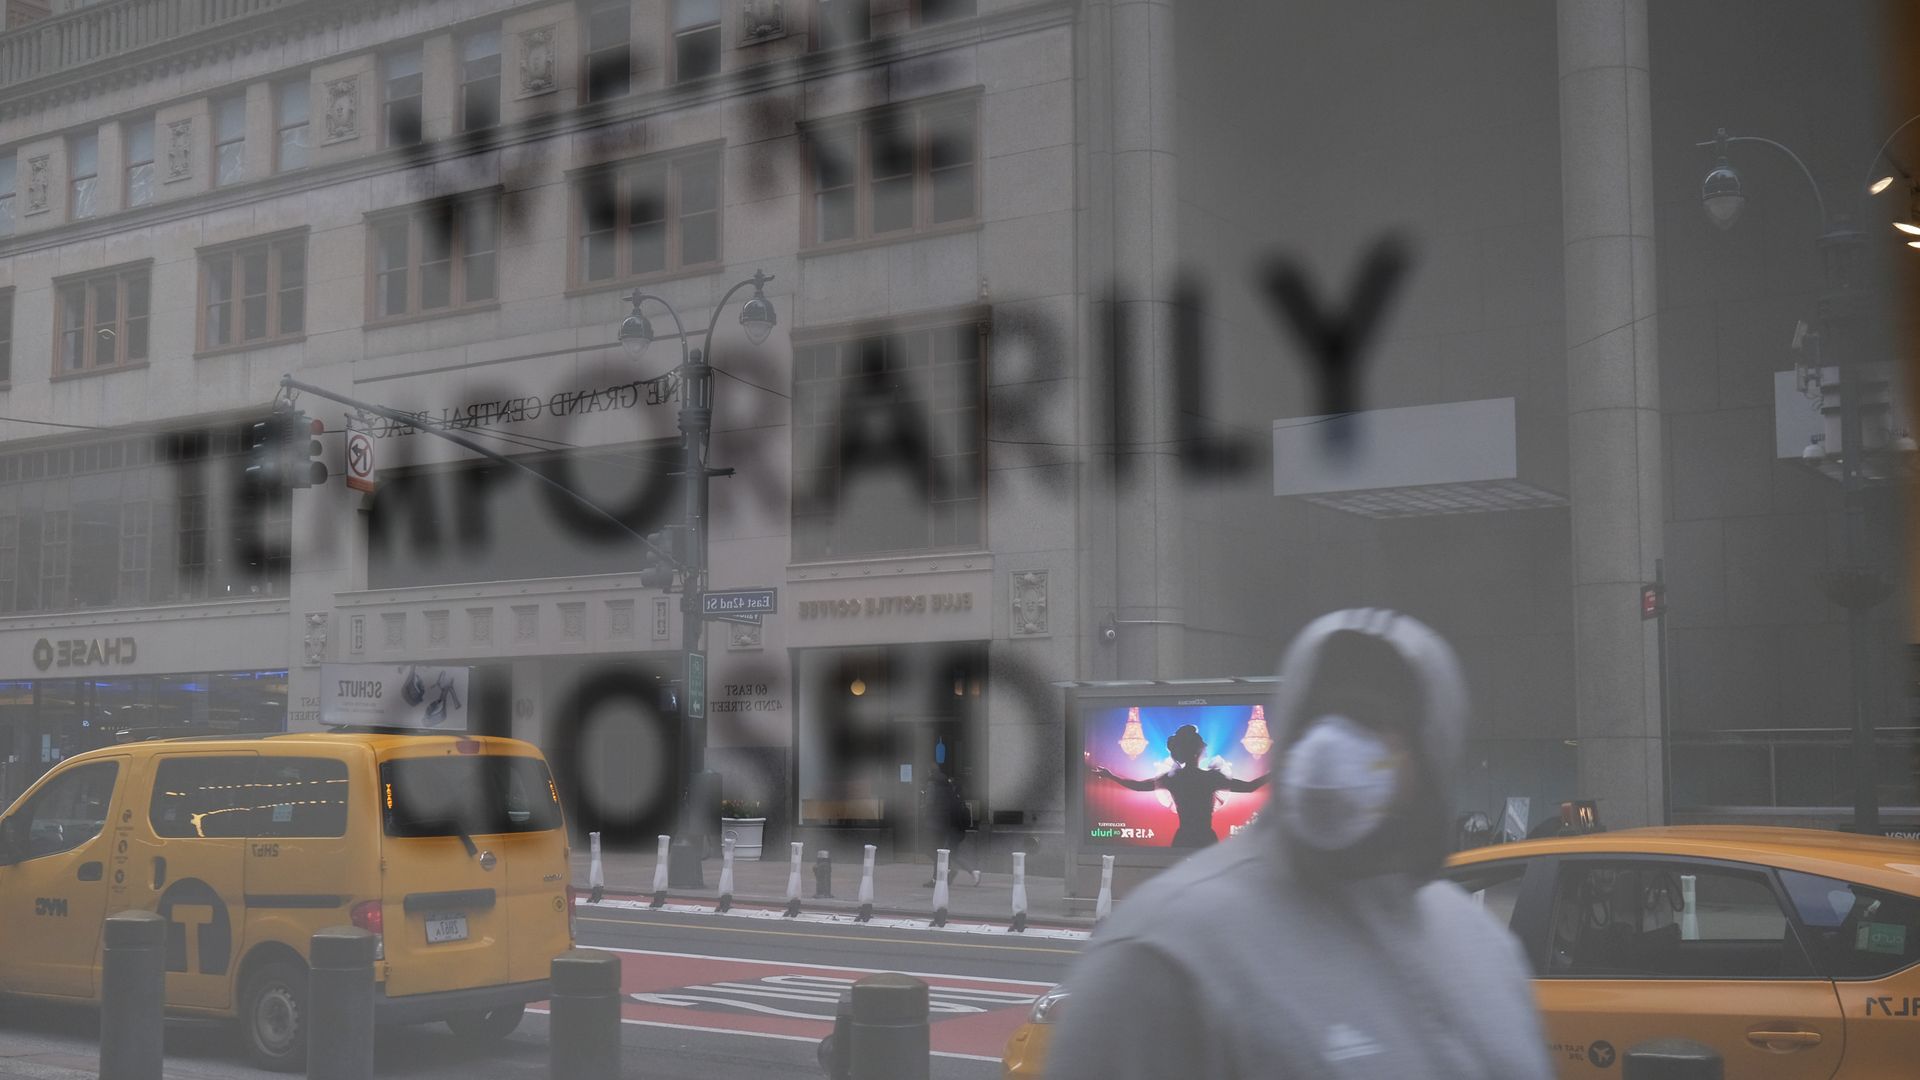 A Closed sign in new york.